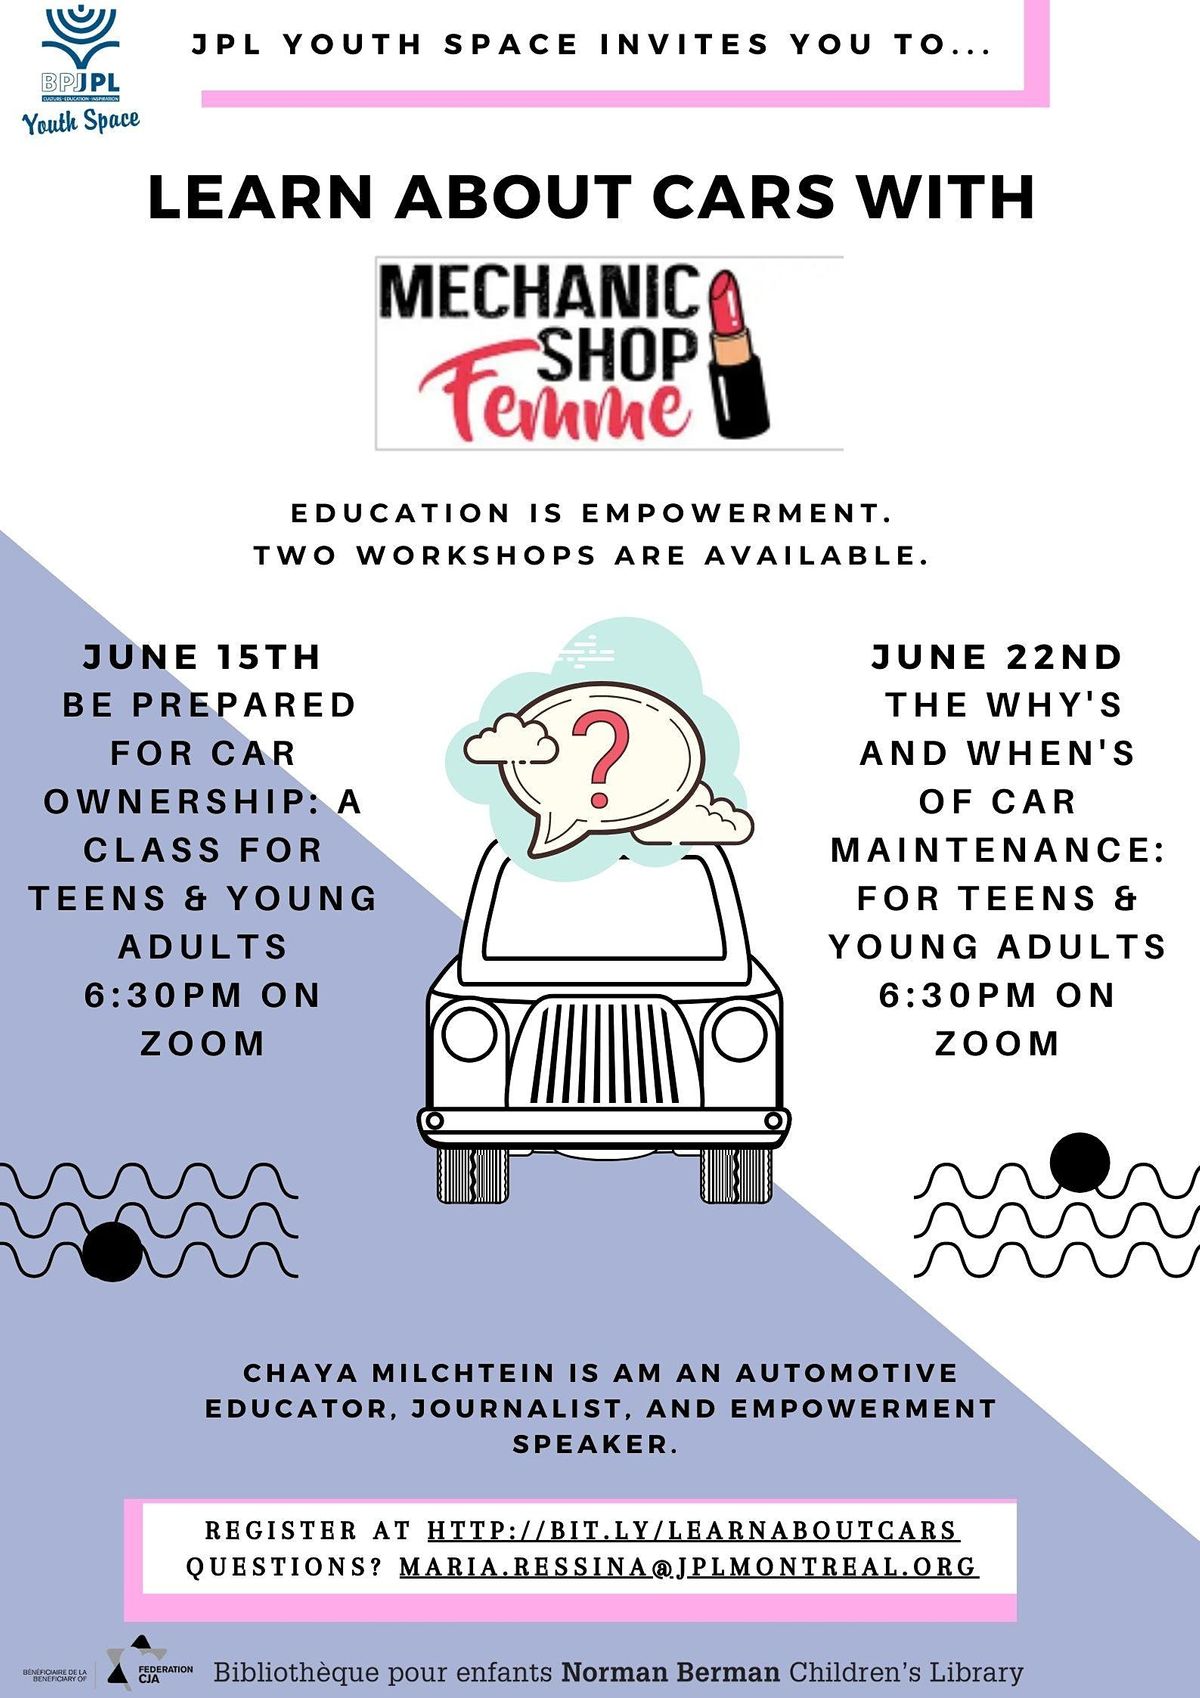 Learn about Cars with Mechanic Shop Femme - for Teens & Young Adults